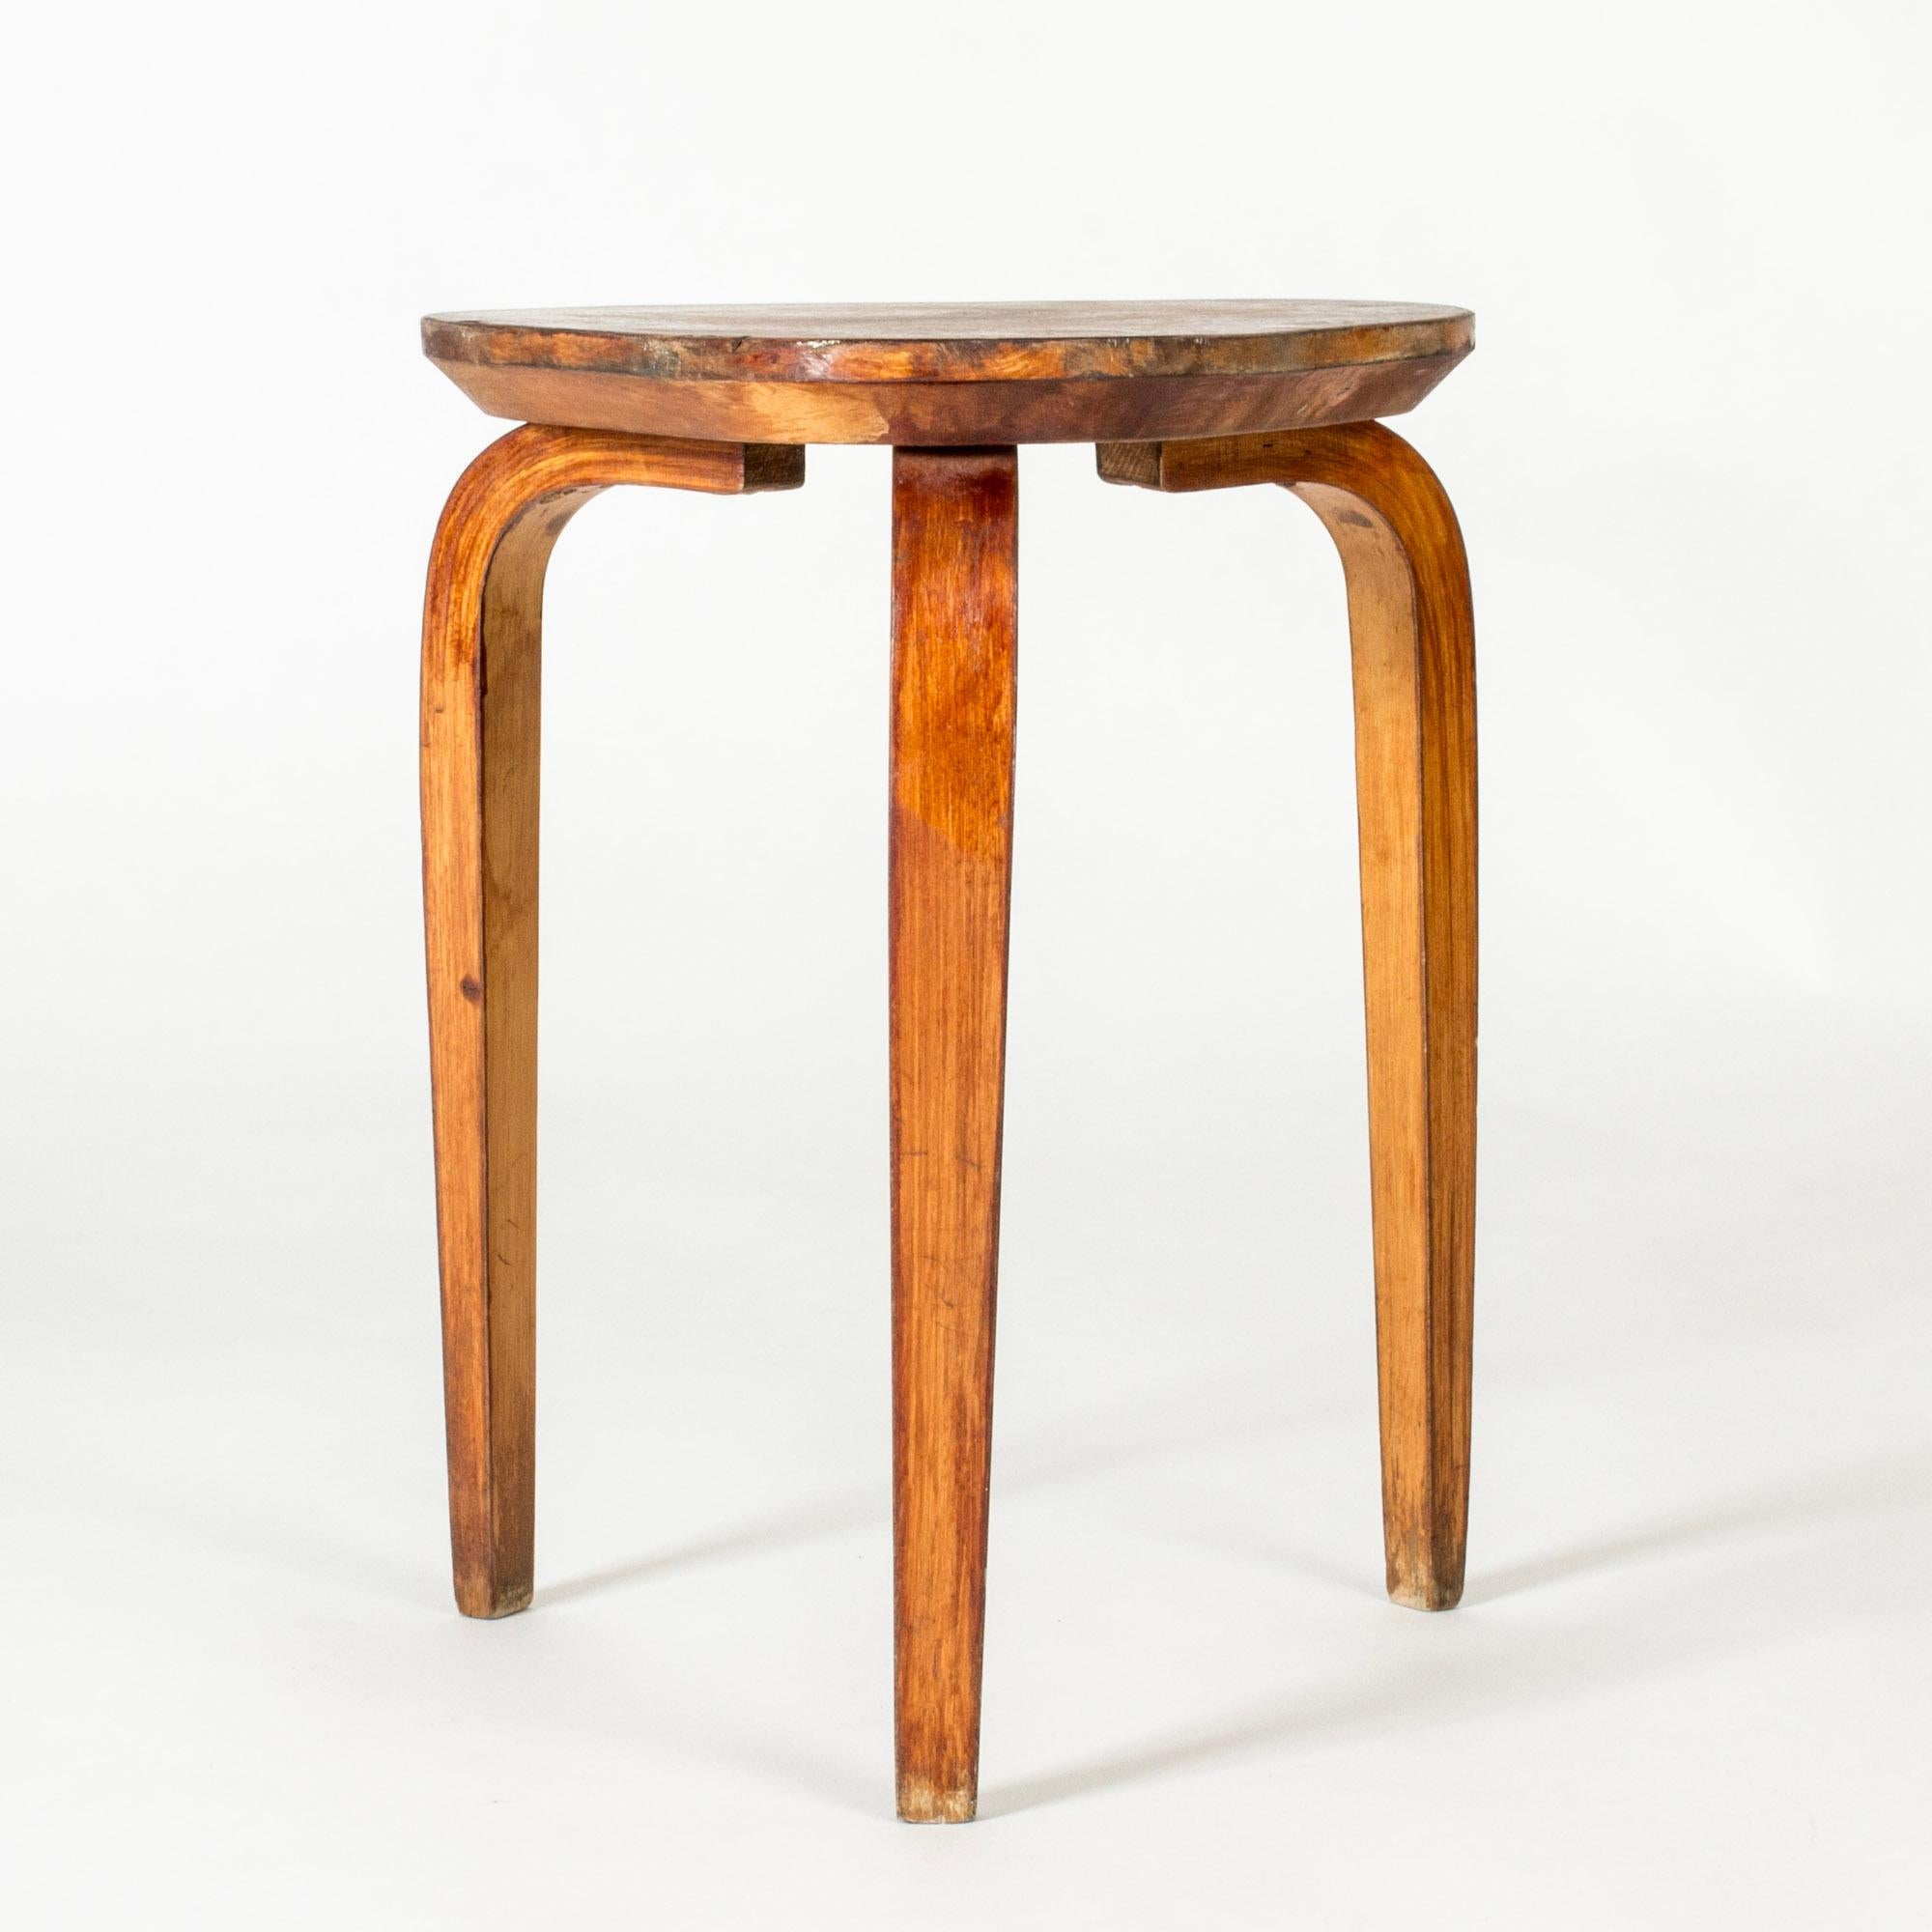 Cool wooden stool by G. A. Berg, in a clean functionalist design with a rounded triangular seat and bentwood legs.